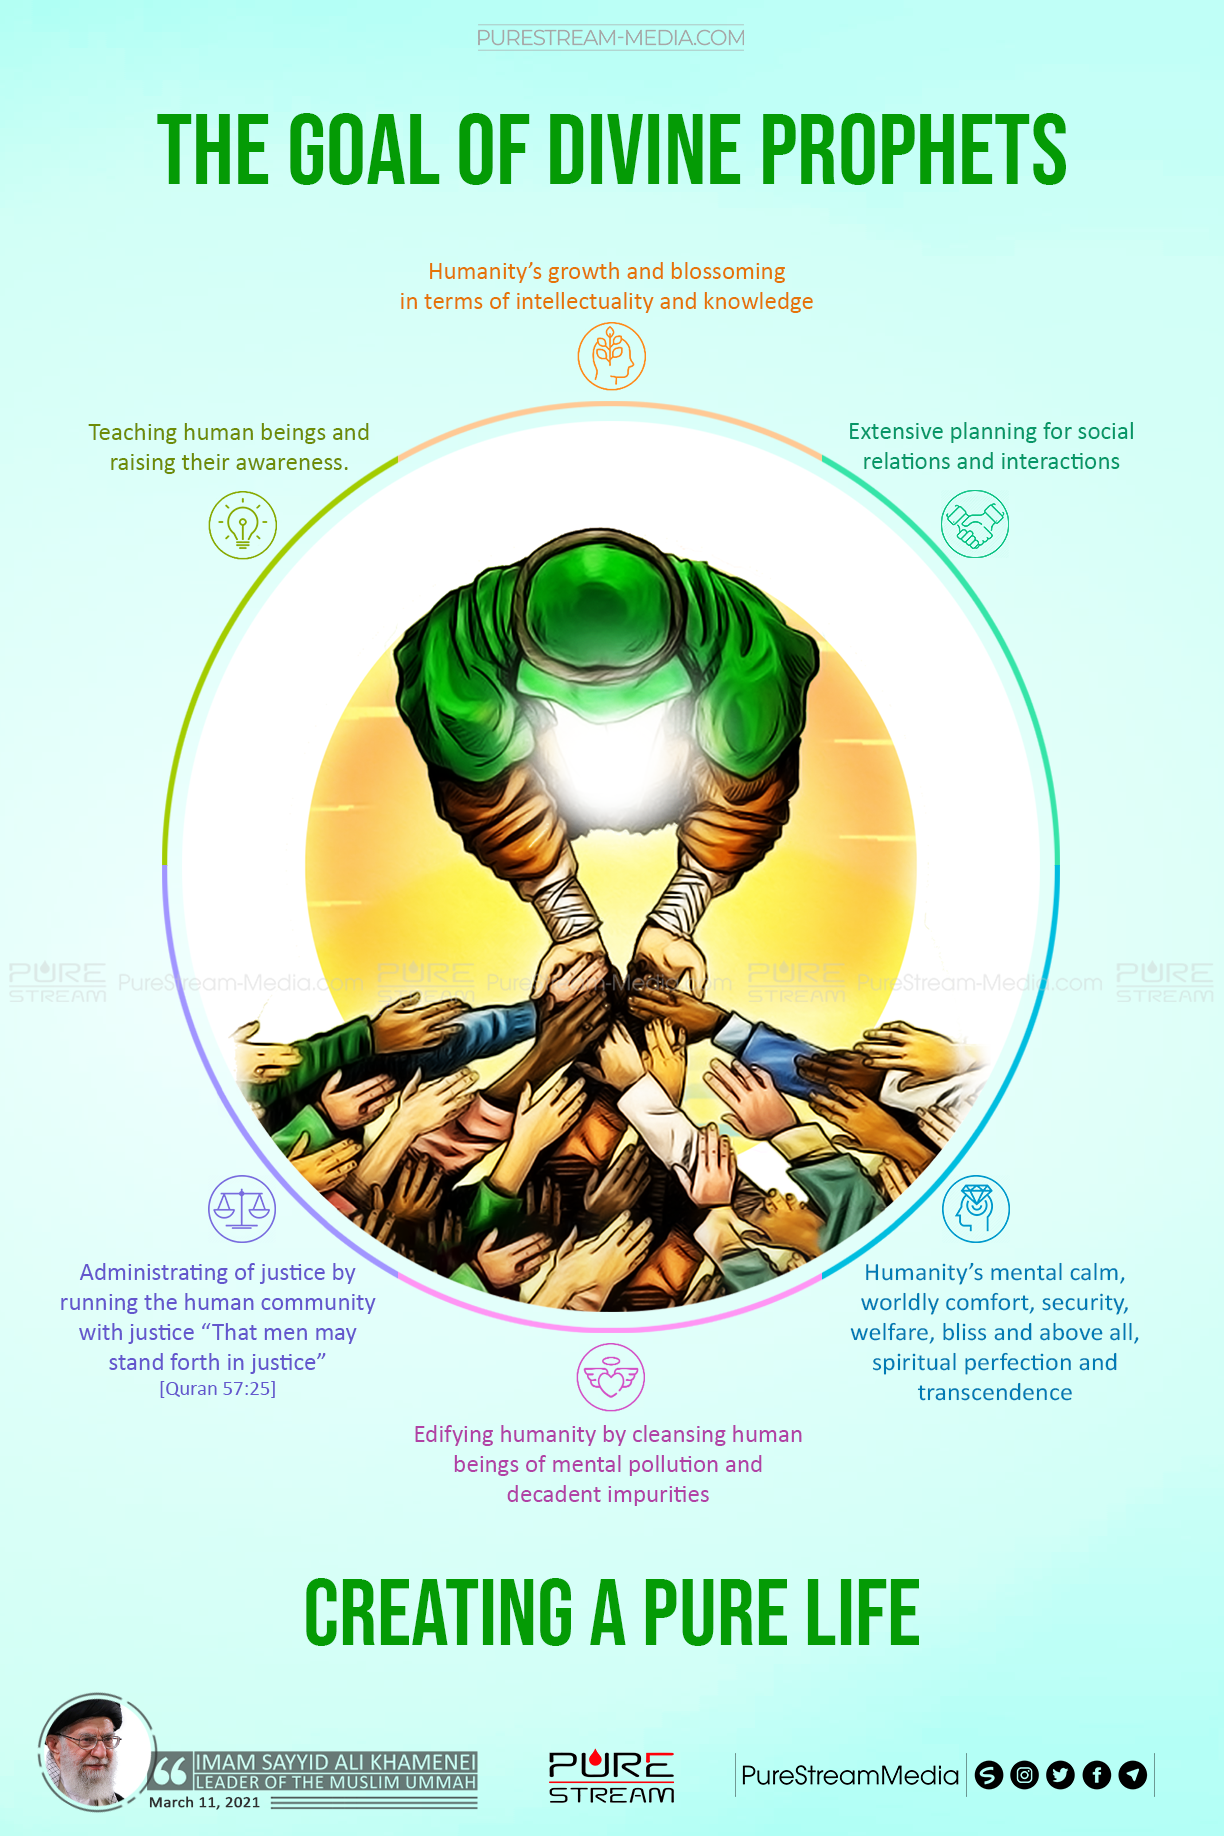 The Goal of Divine Prophets: Creating A Pure Life | Infographic